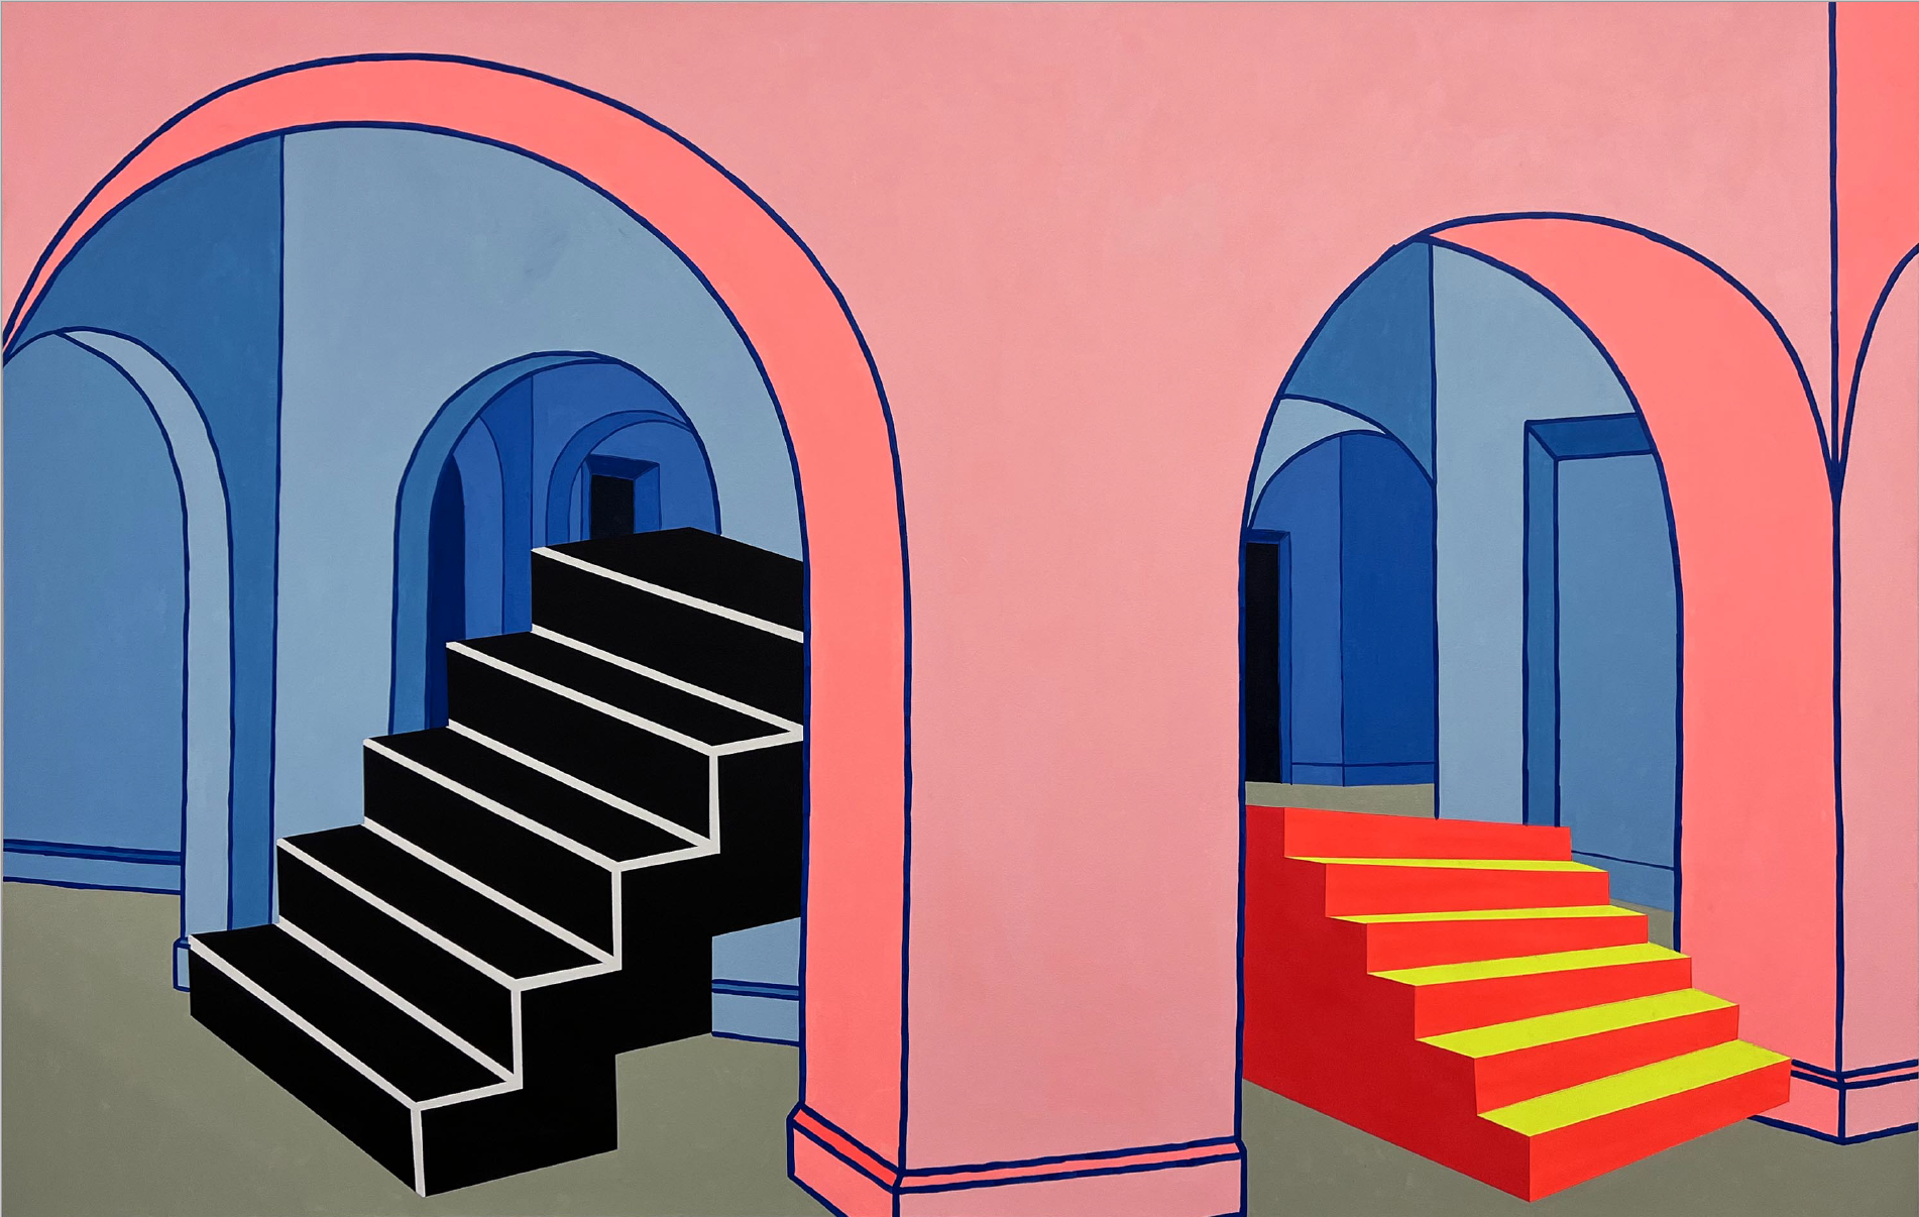 Untitled(Double Staircase) by Christopher Cascio